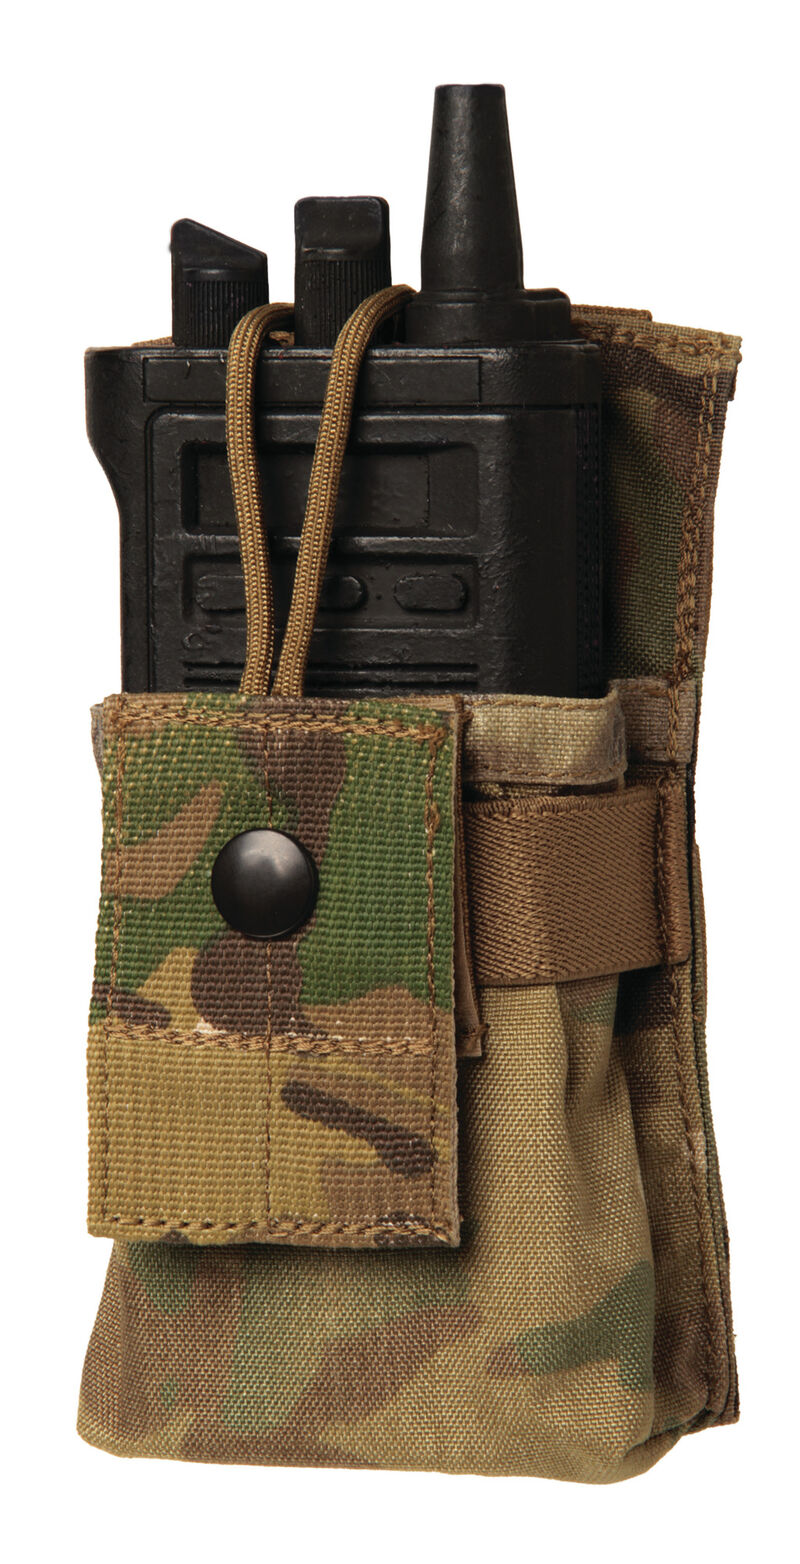 Details about   Blackhawk STRIKE MBITR MOLLE Radio Pouch Coyote Tan NEW